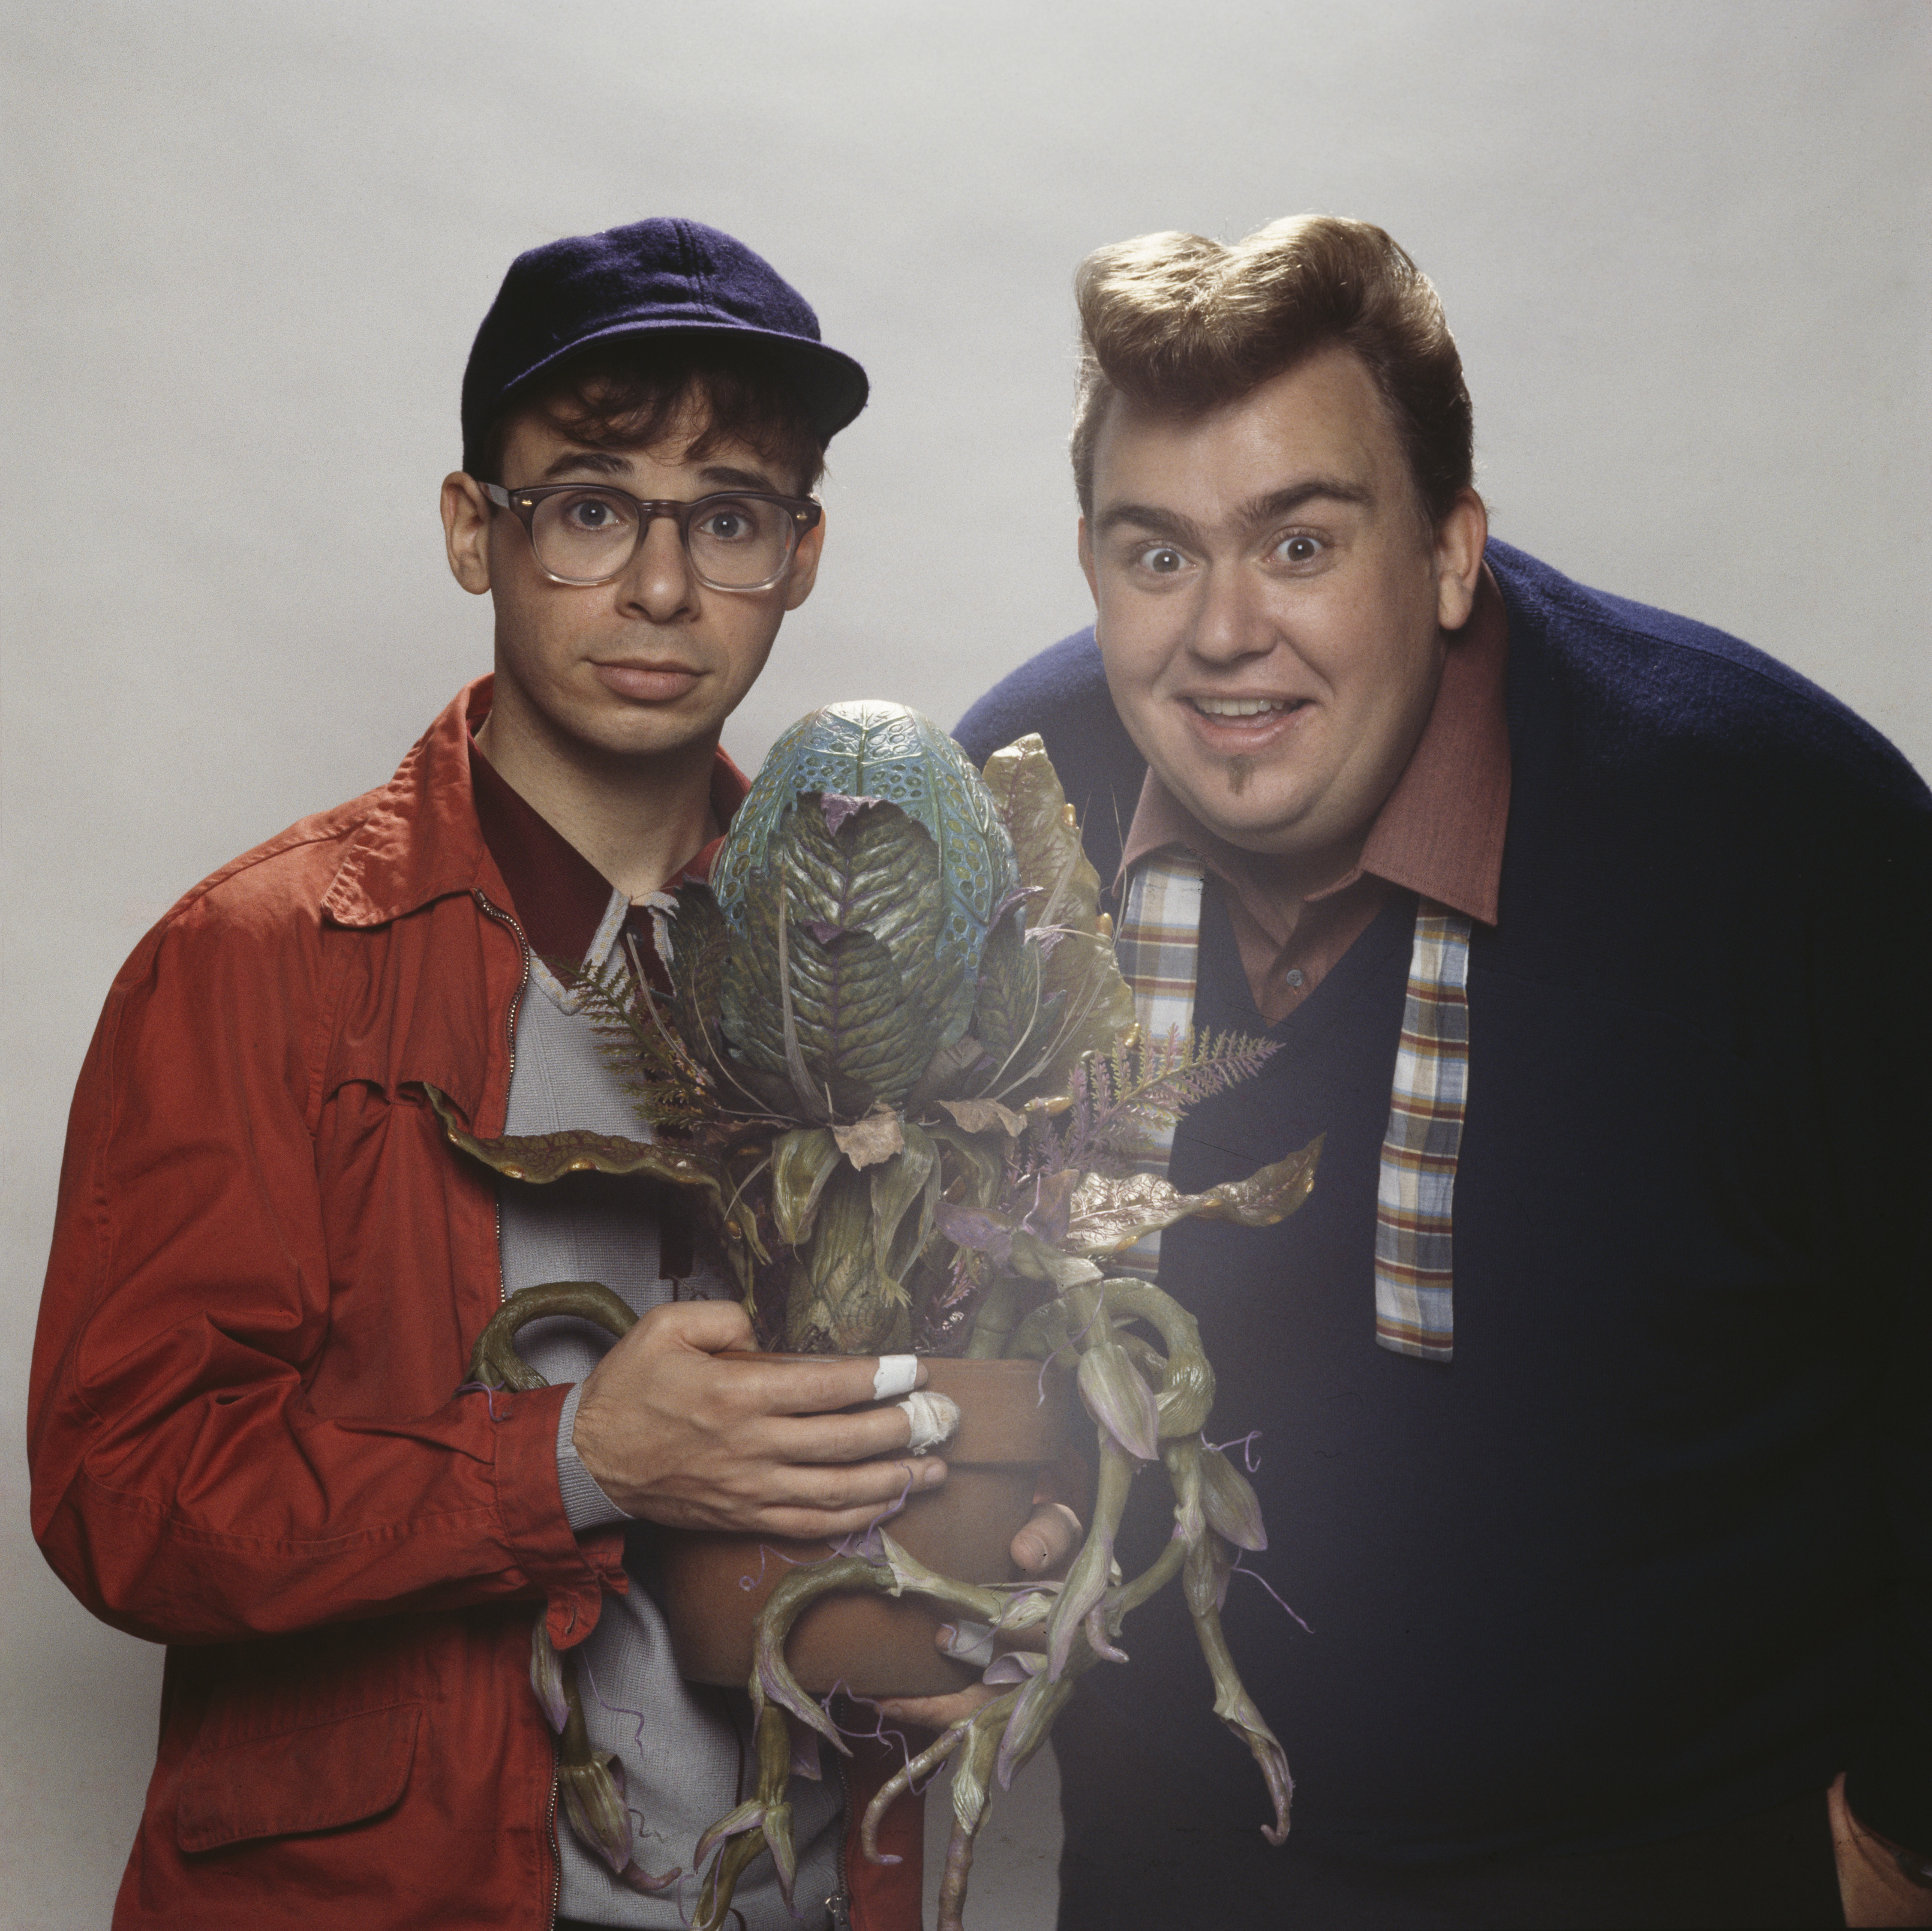 Rick Moranis and John Candy in the set of "Little Shop of Horrors," 1986  | Source: Getty Images